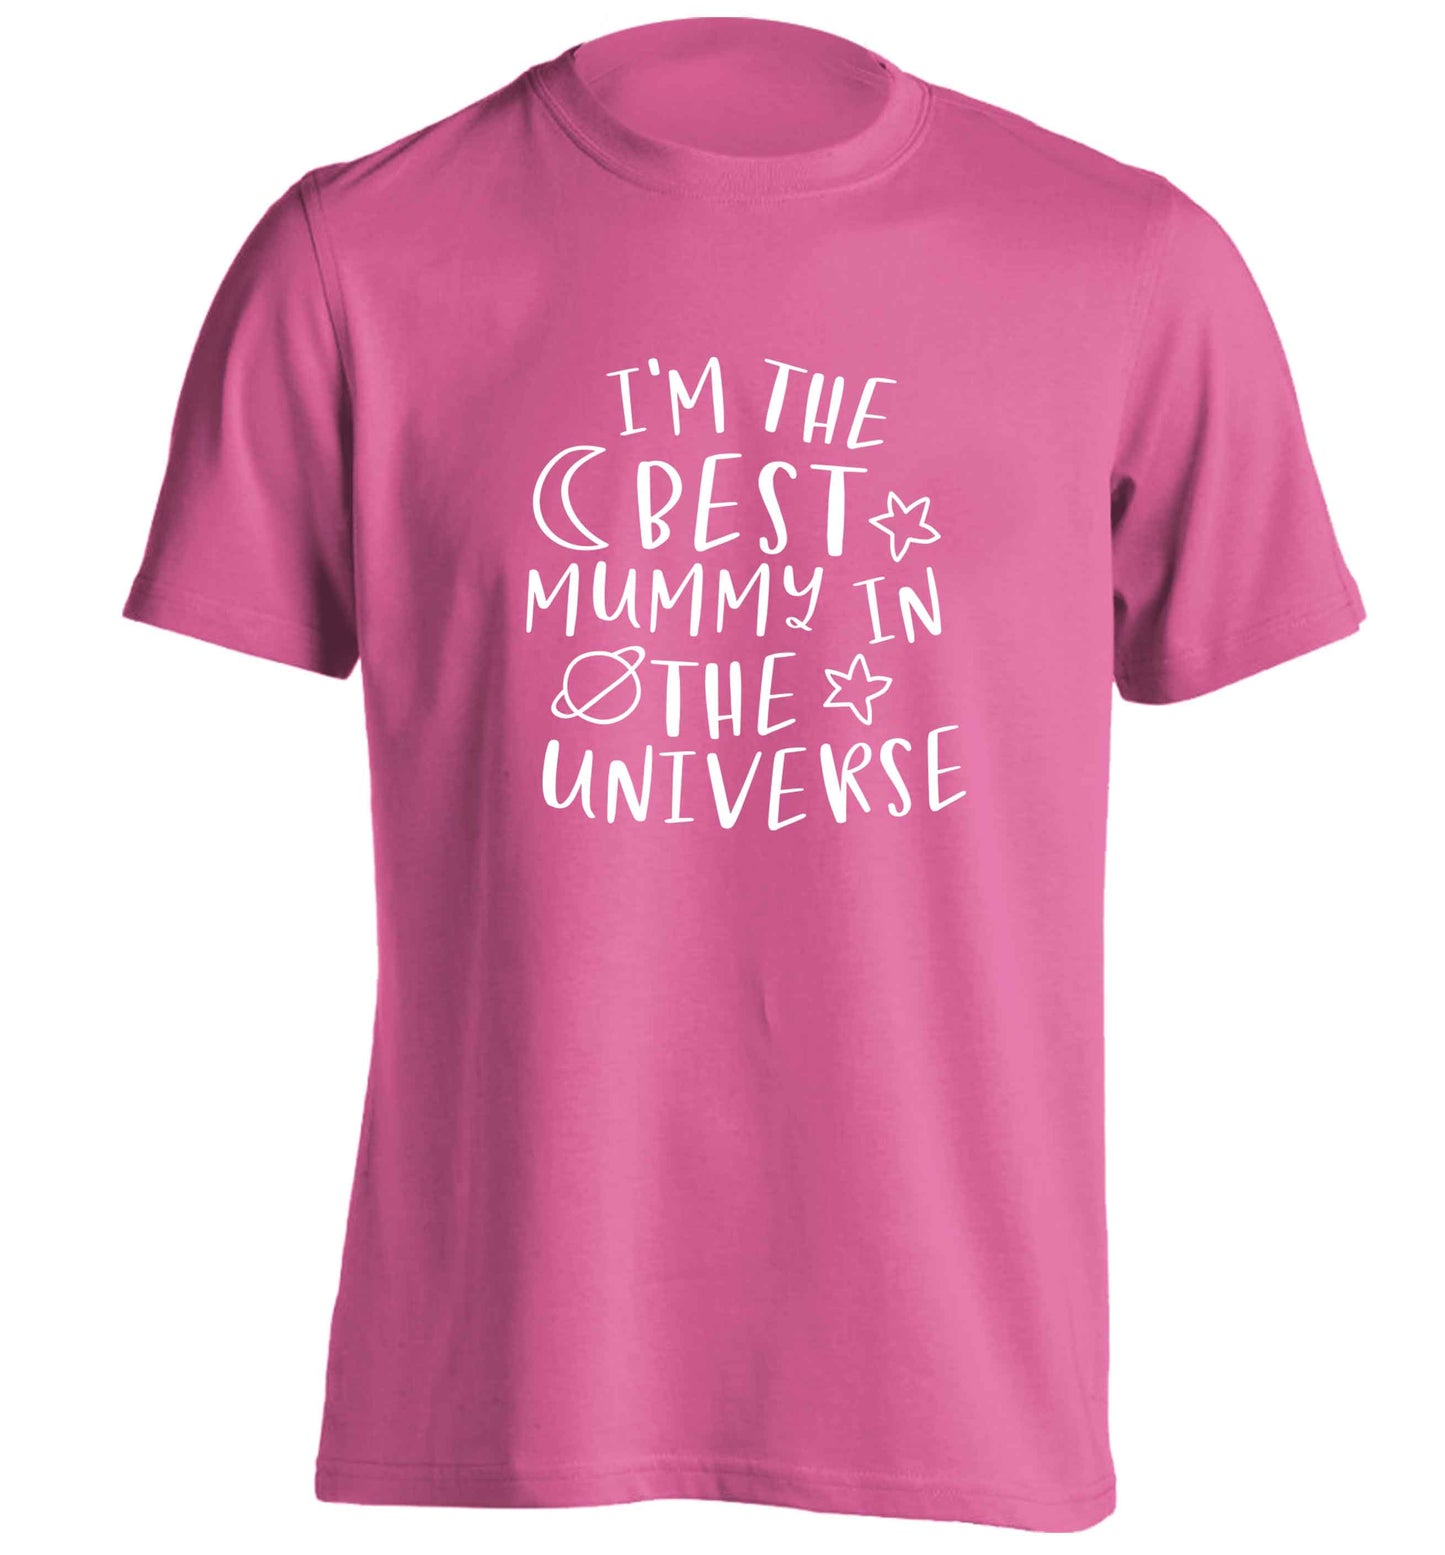 I'm the best mummy in the universe adults unisex pink Tshirt 2XL